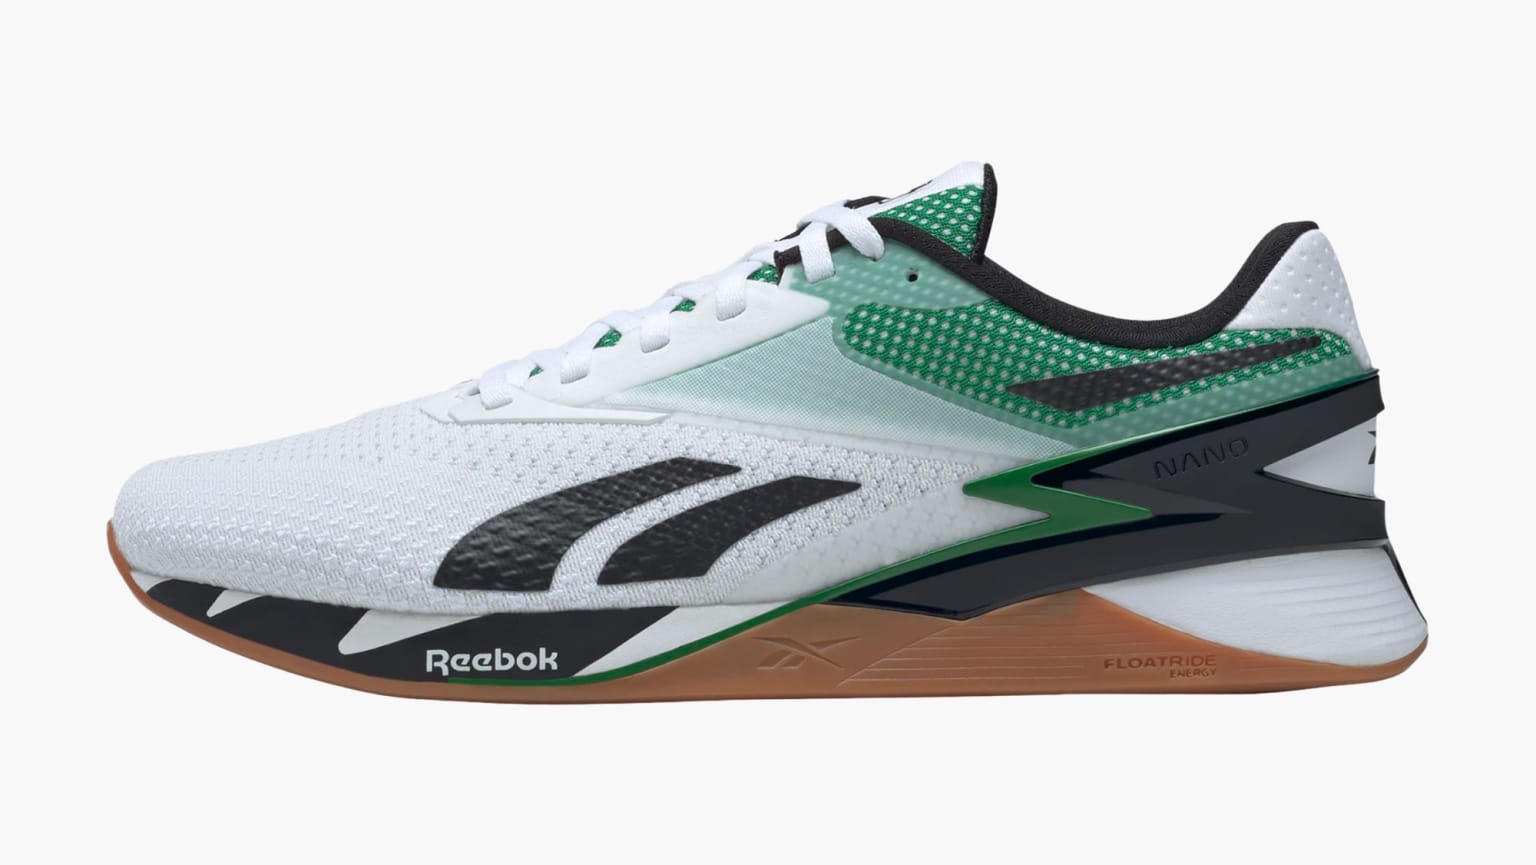 Reebok Updates Nano X3 Shoes With Sustainable Soles